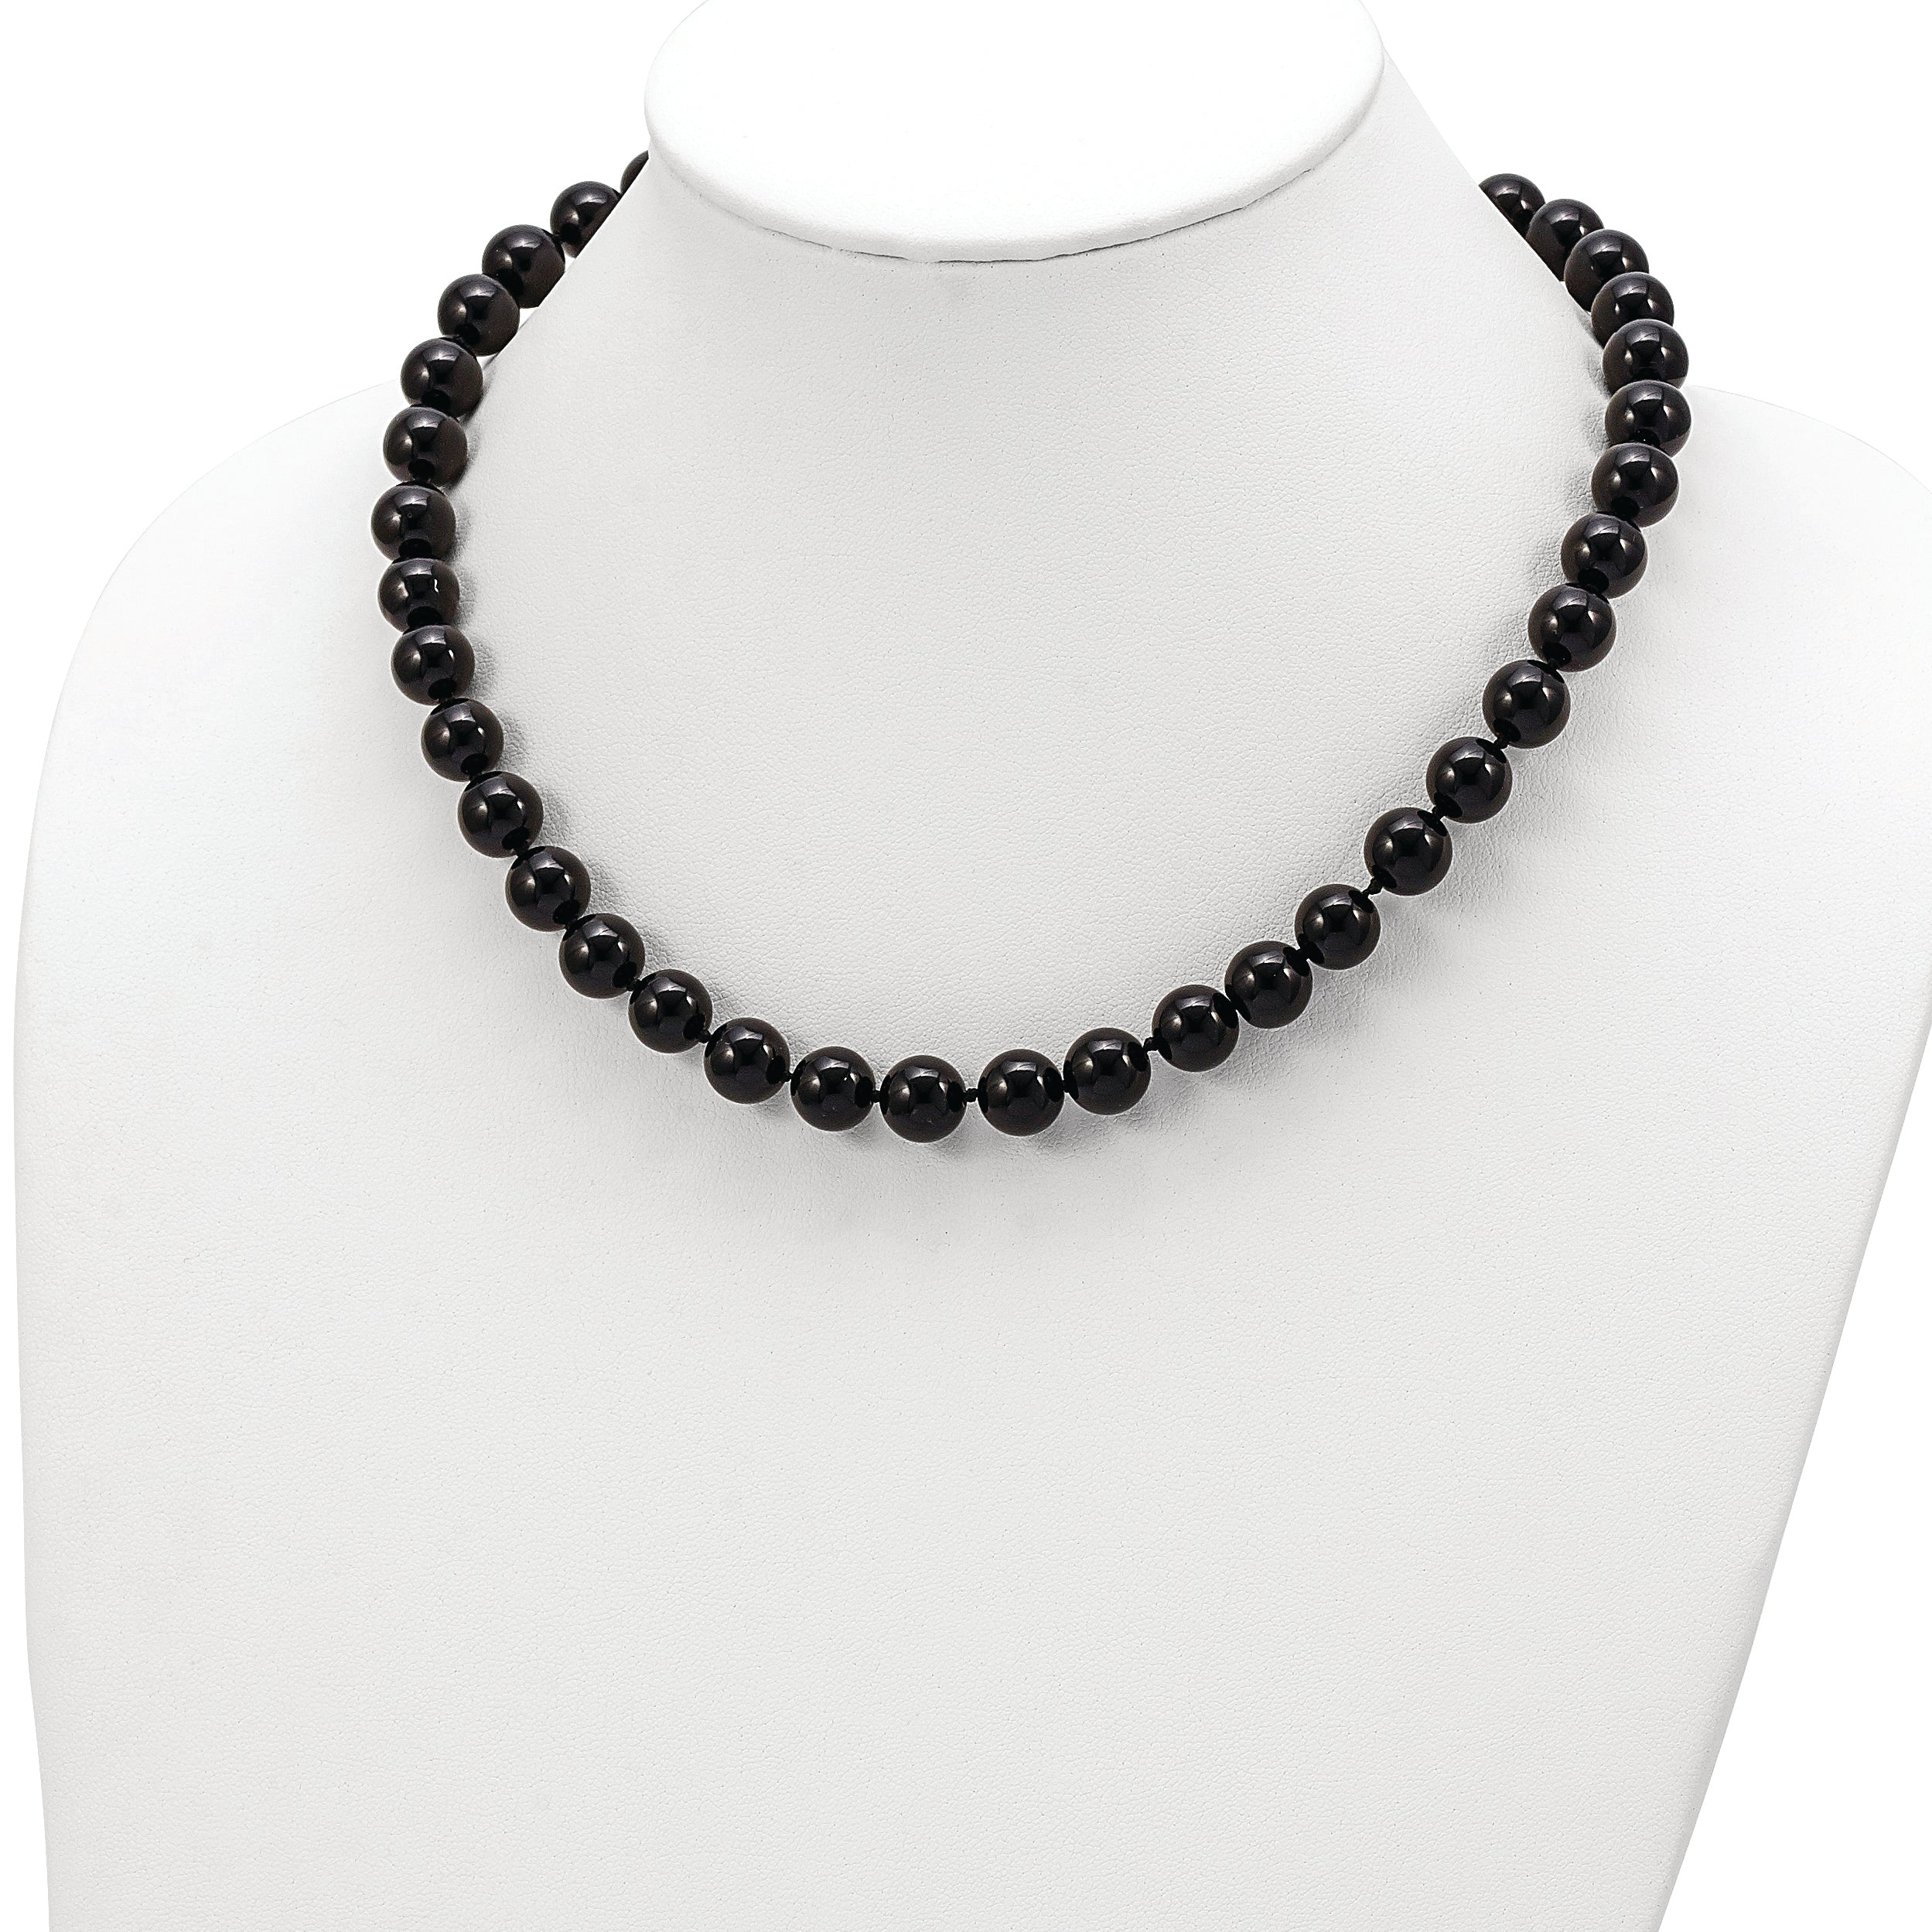 10-10.5mm Smooth Beaded Black Agate Necklace w/Sterling S.RH Clasp